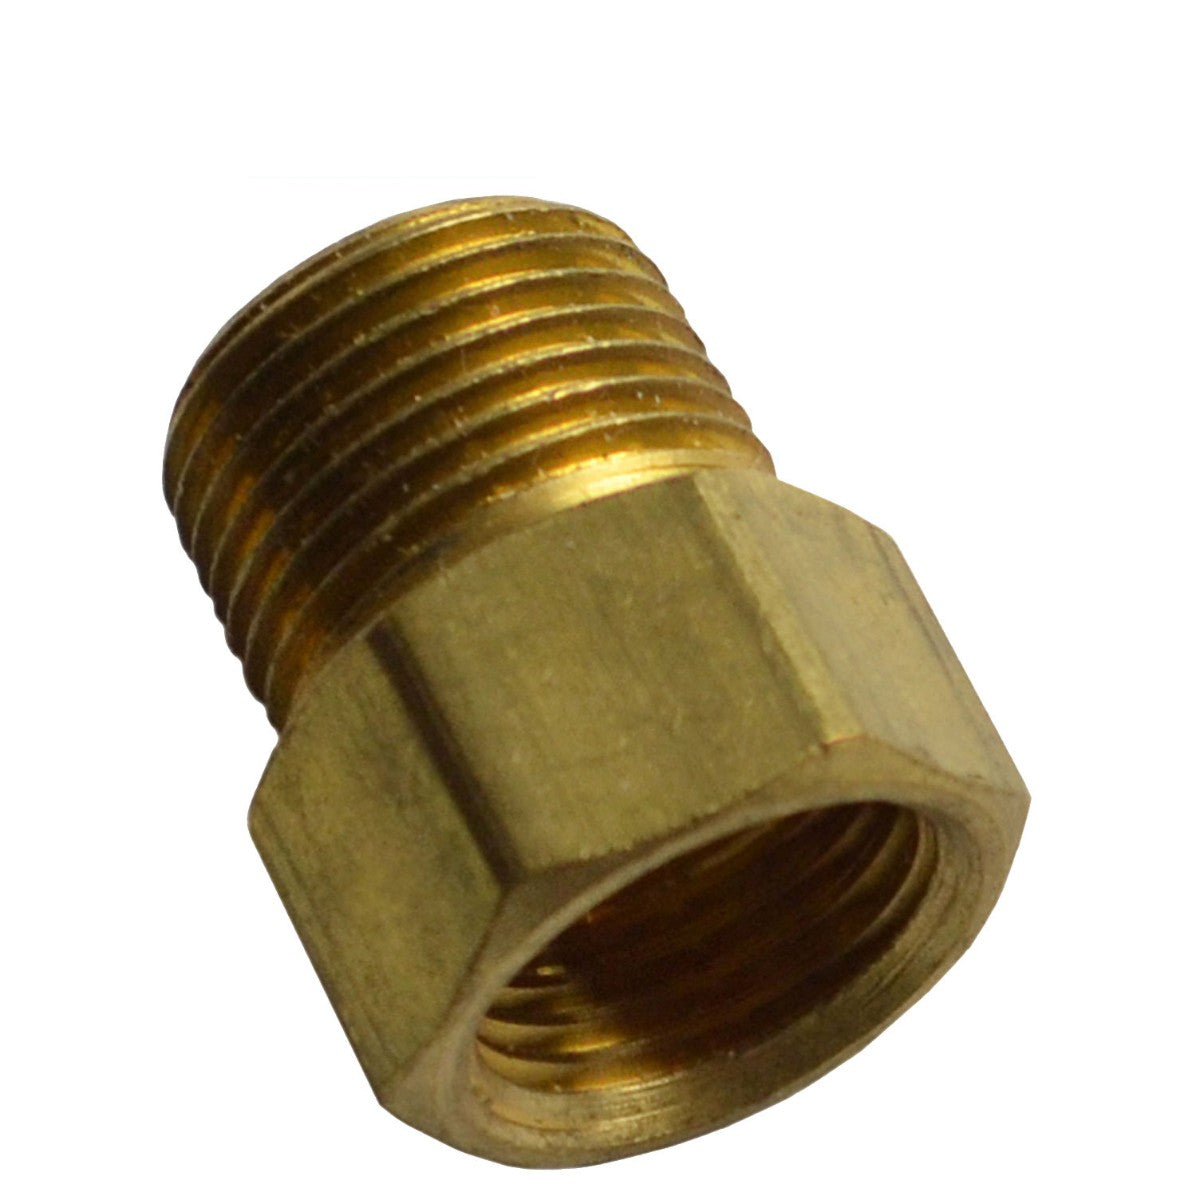 3/8 Male Flare to 1/2 Female NPT Coupling